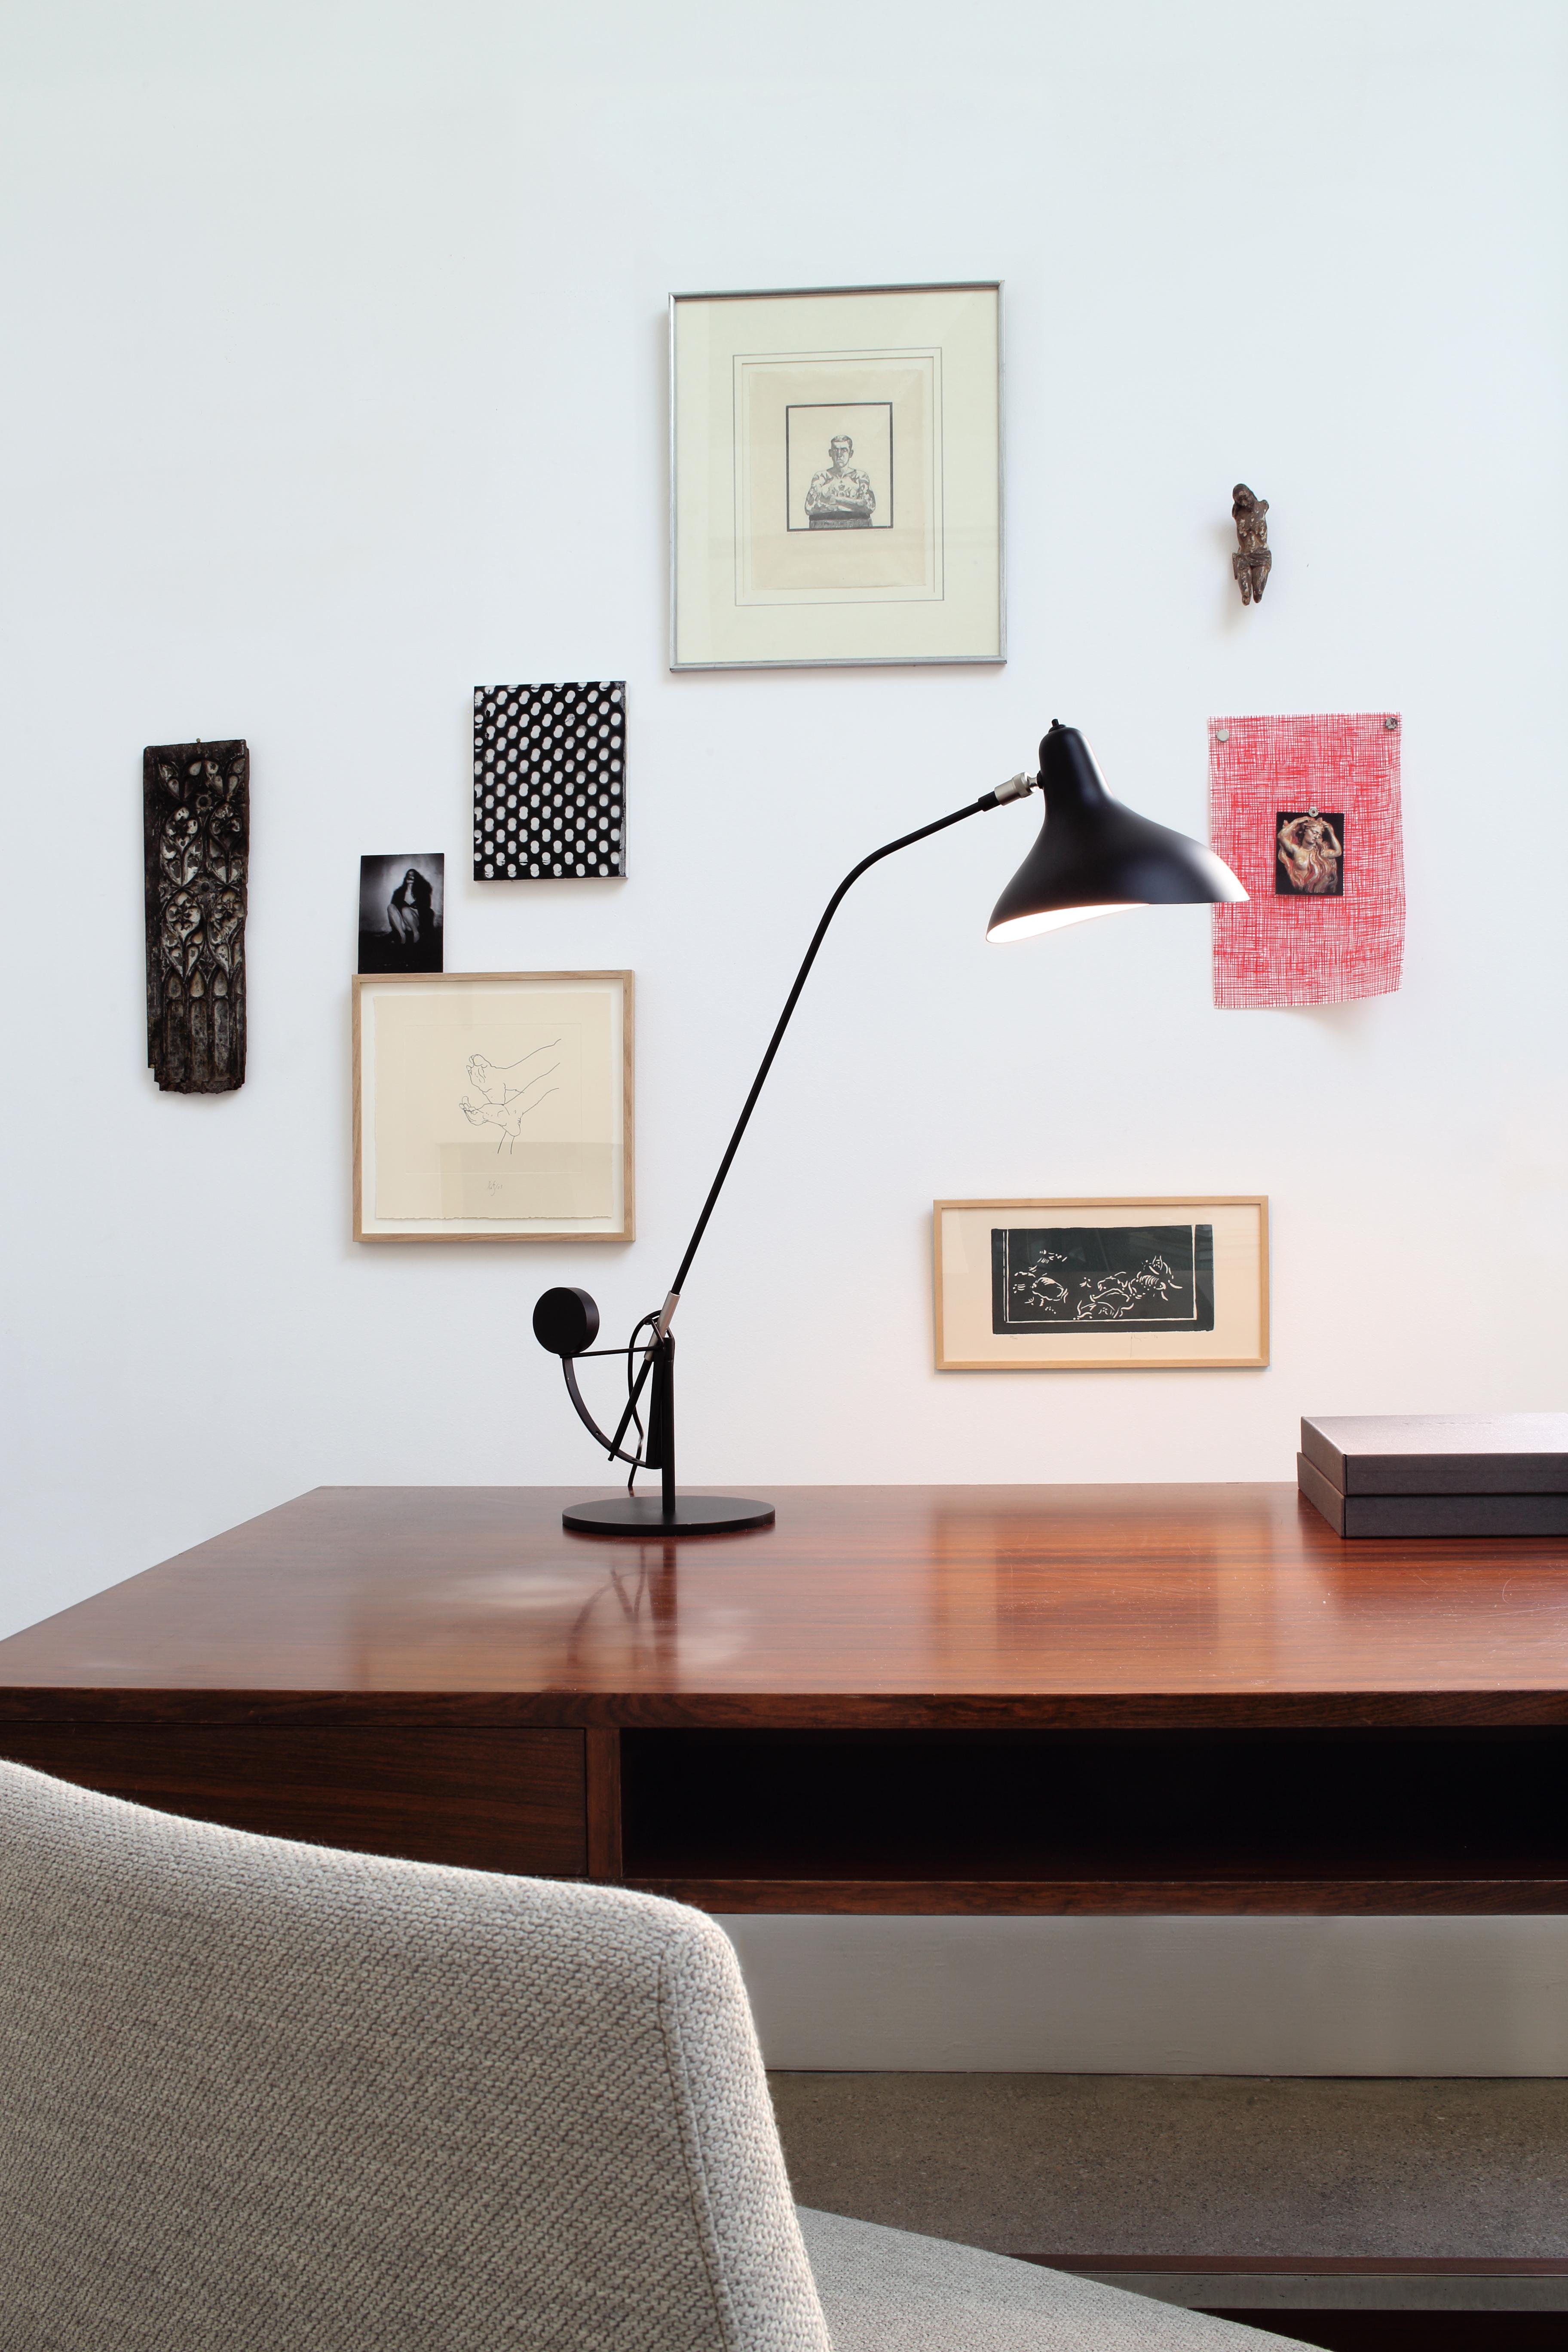 British Mantis BS3 Table Lamp Designed in 1951 by B. Schottlander as a Tribute to Calder For Sale